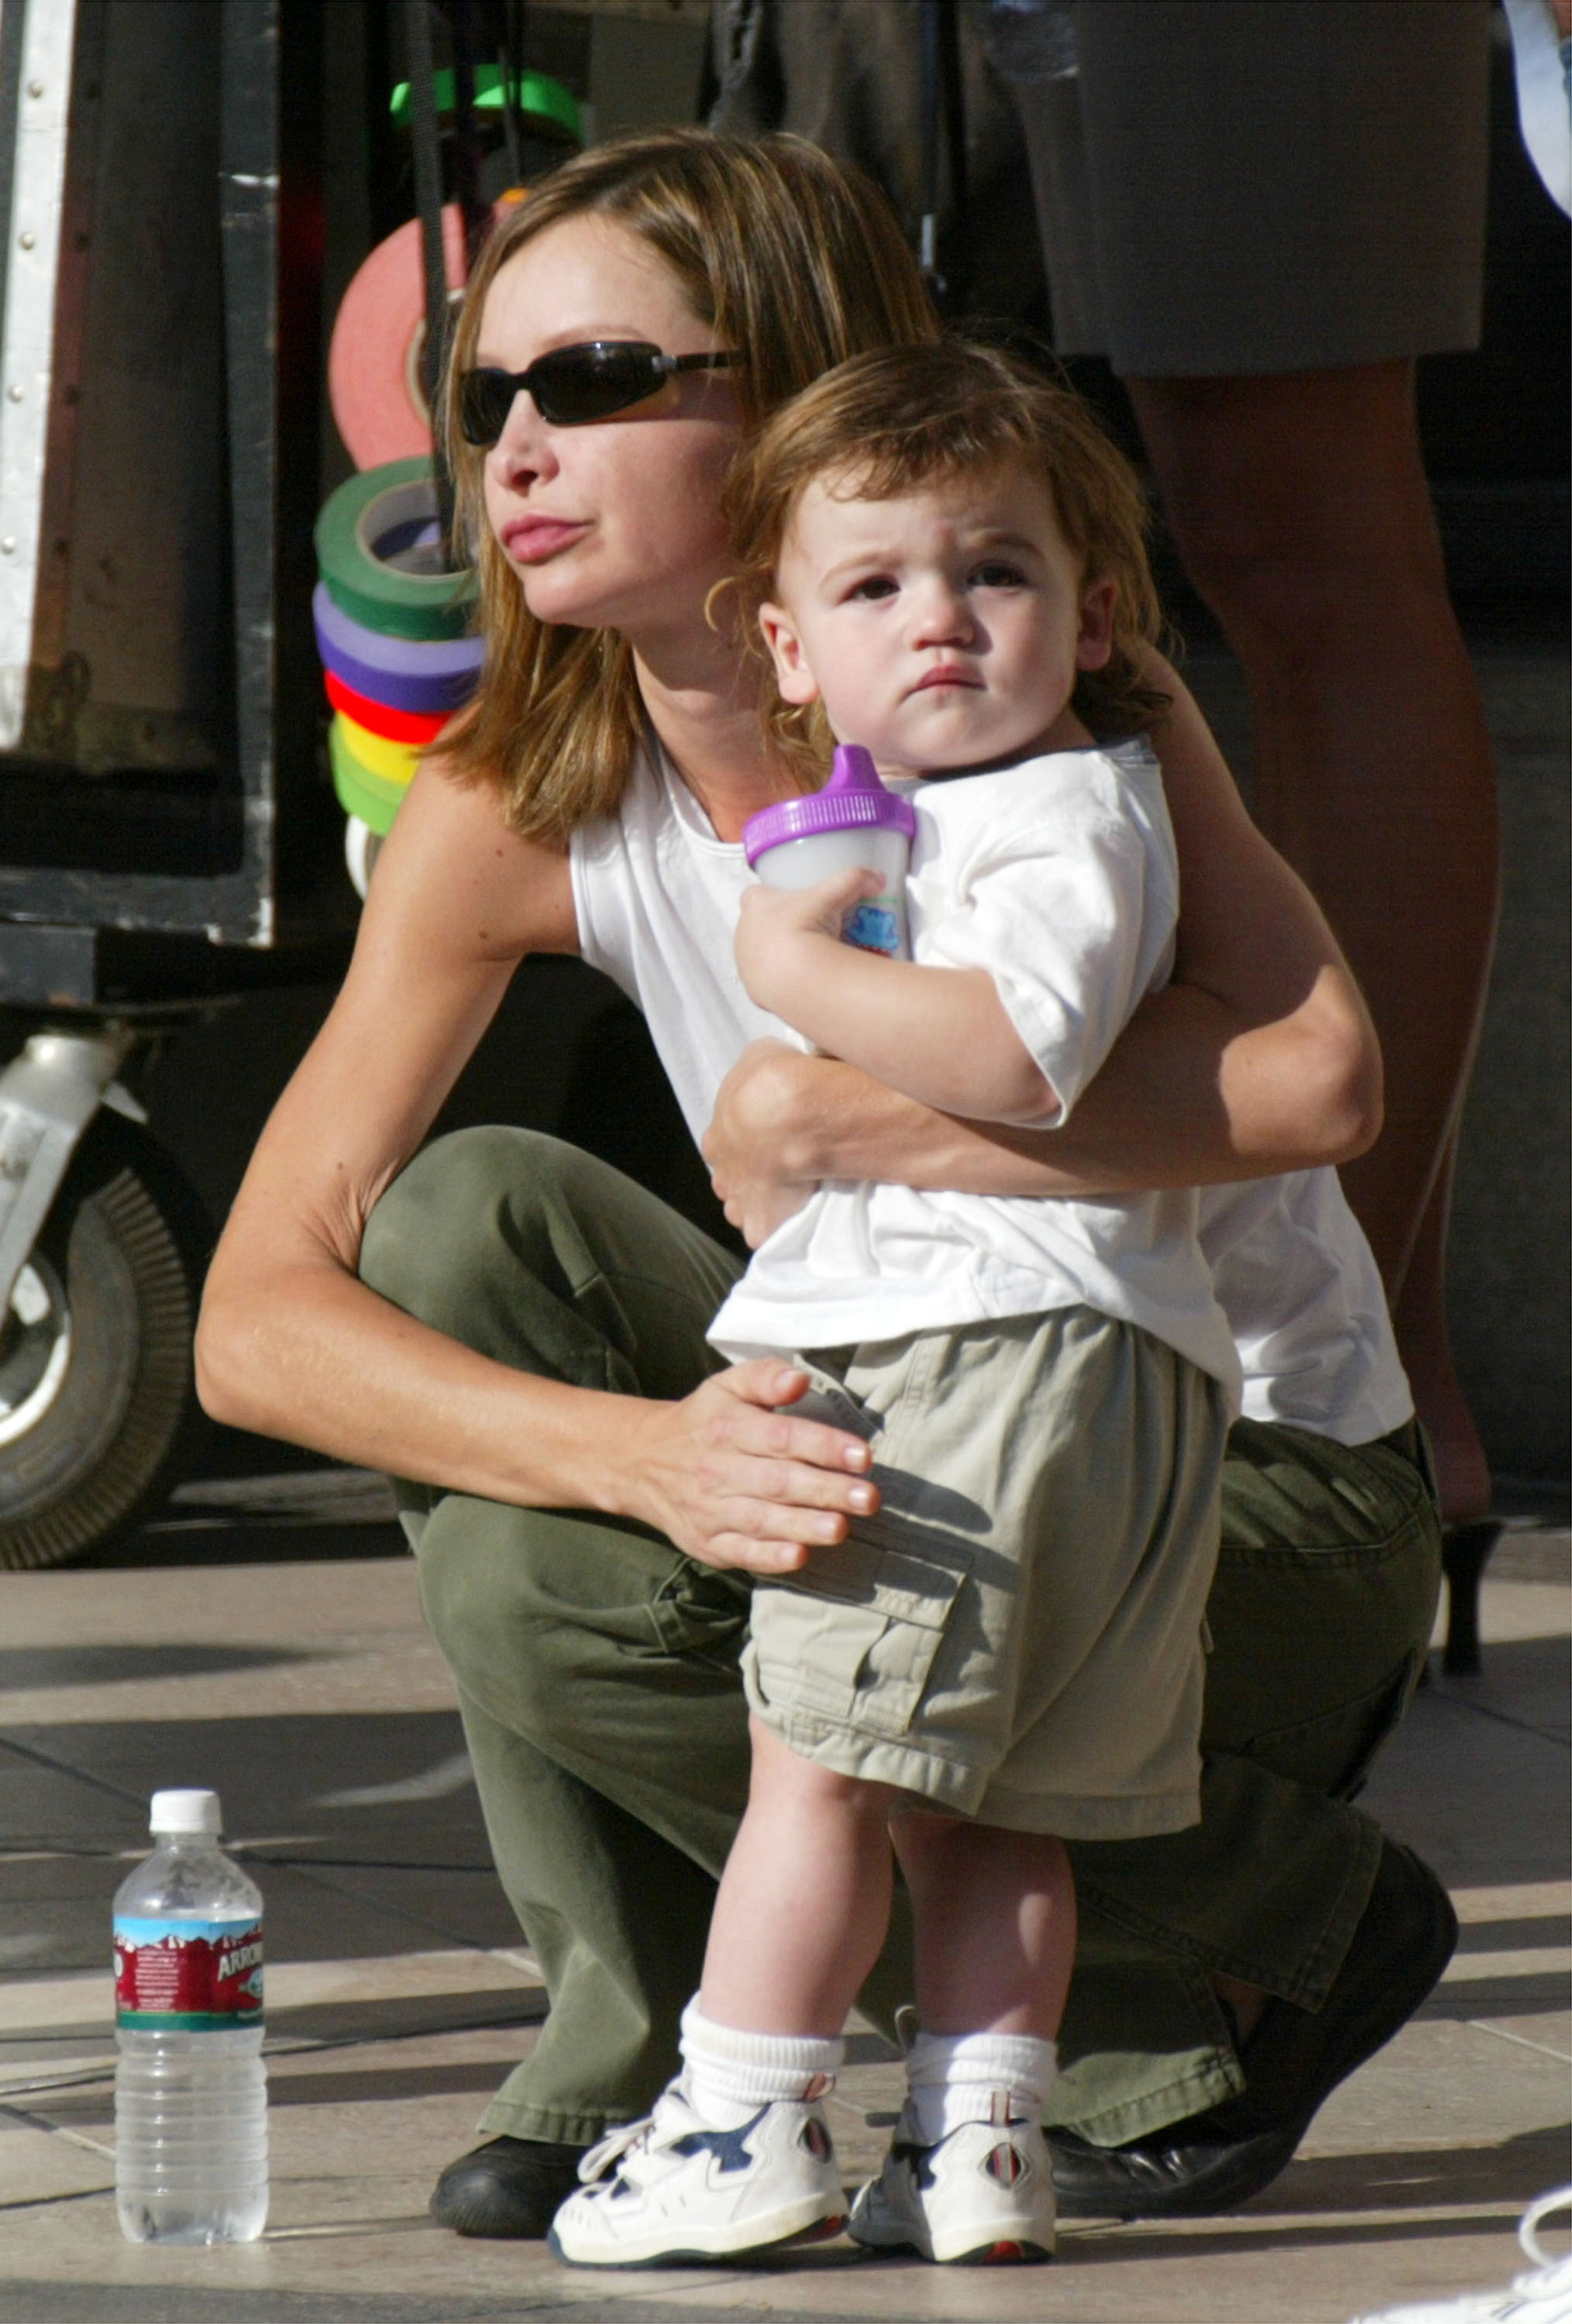 Calista Flockhart and her son, Liam, on the "Two Cops" movie set in Beverly Hills in September 2002 | Source: Getty Images